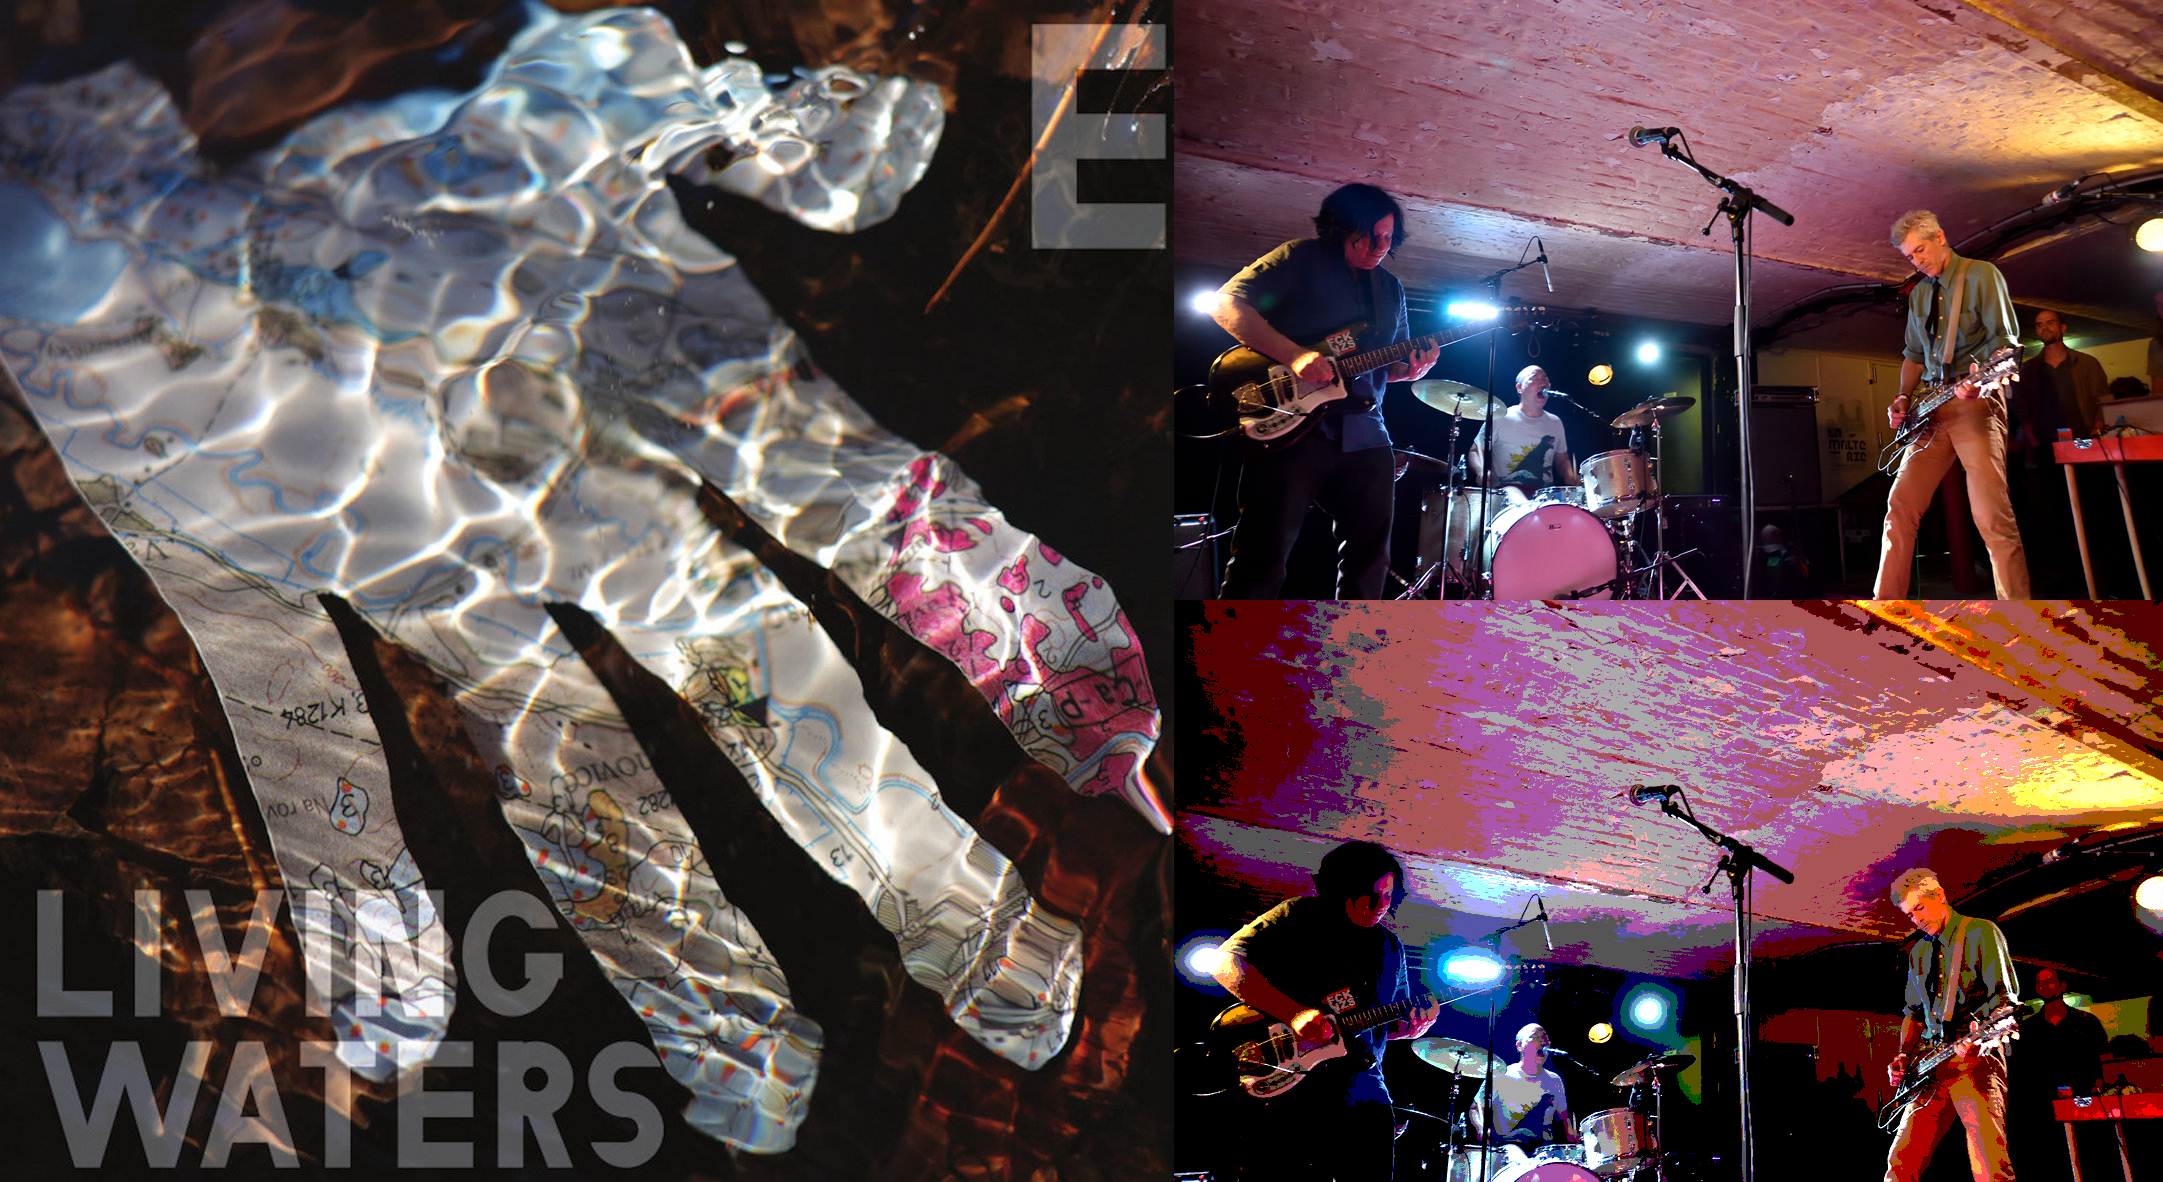 Album art for Boston noise rock band 'E''s album 'Living Waters,' with a photo of band members Thalia Zedek, Ernie Kim and Jason Sanford playing live.